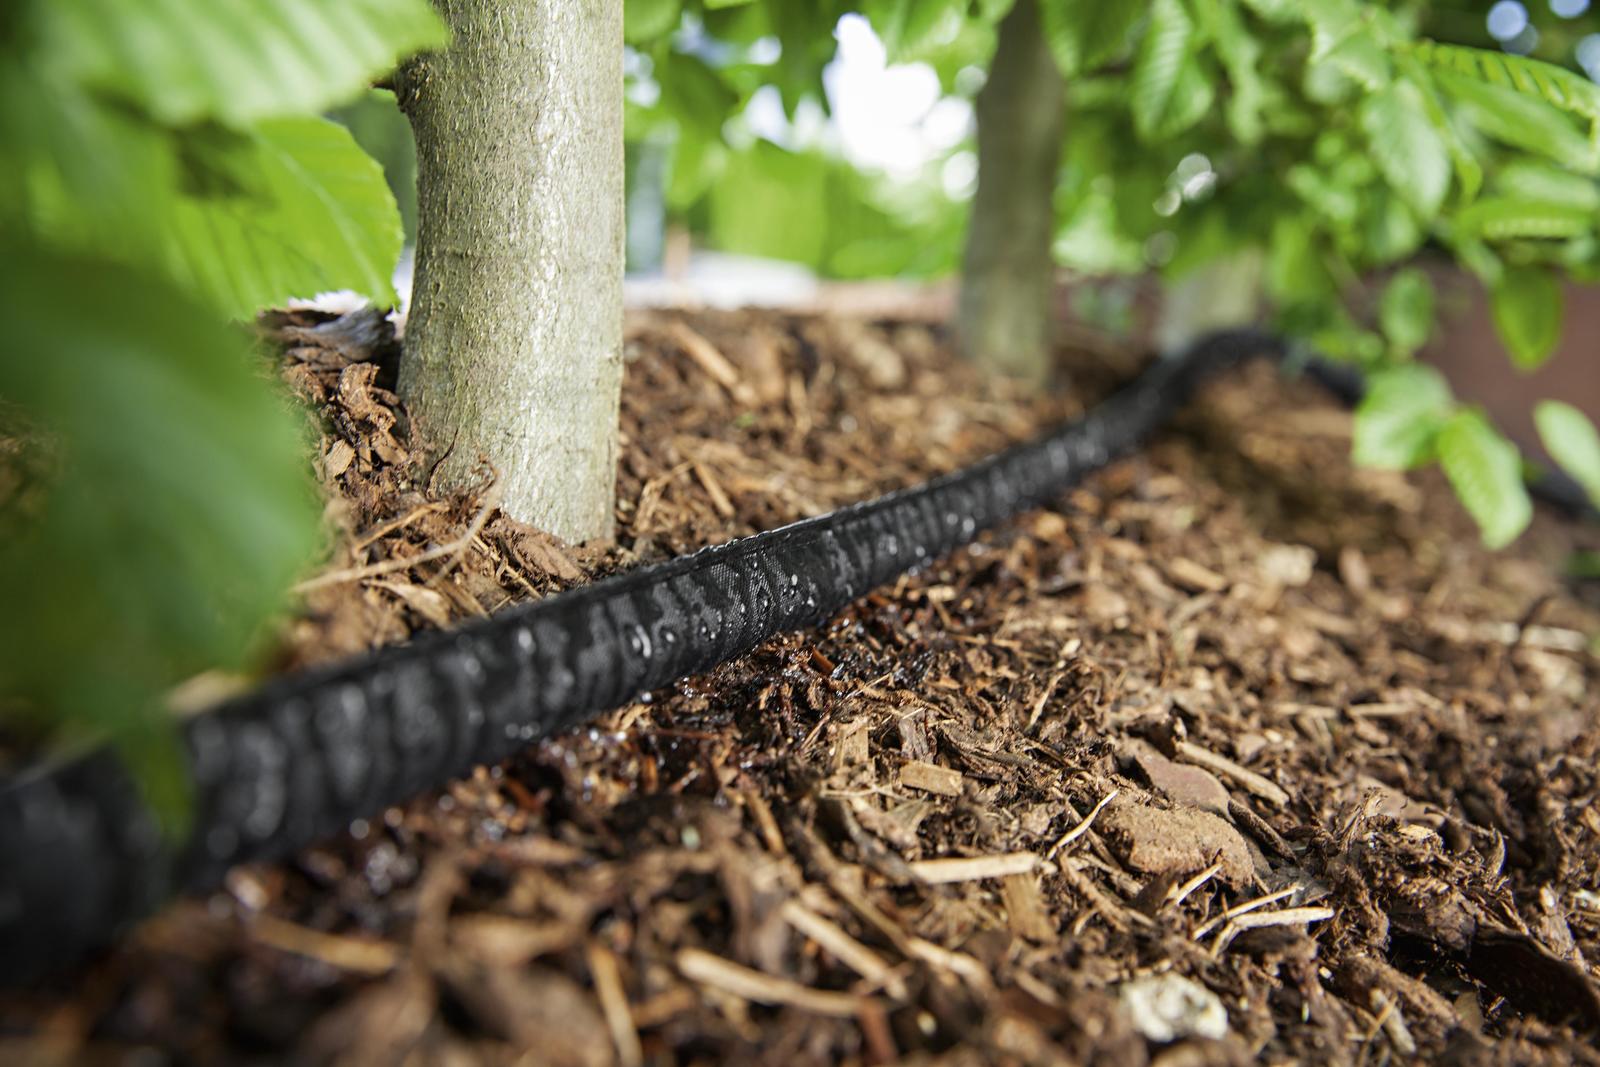 Soaker hoses are the key to a hassle free watering system.